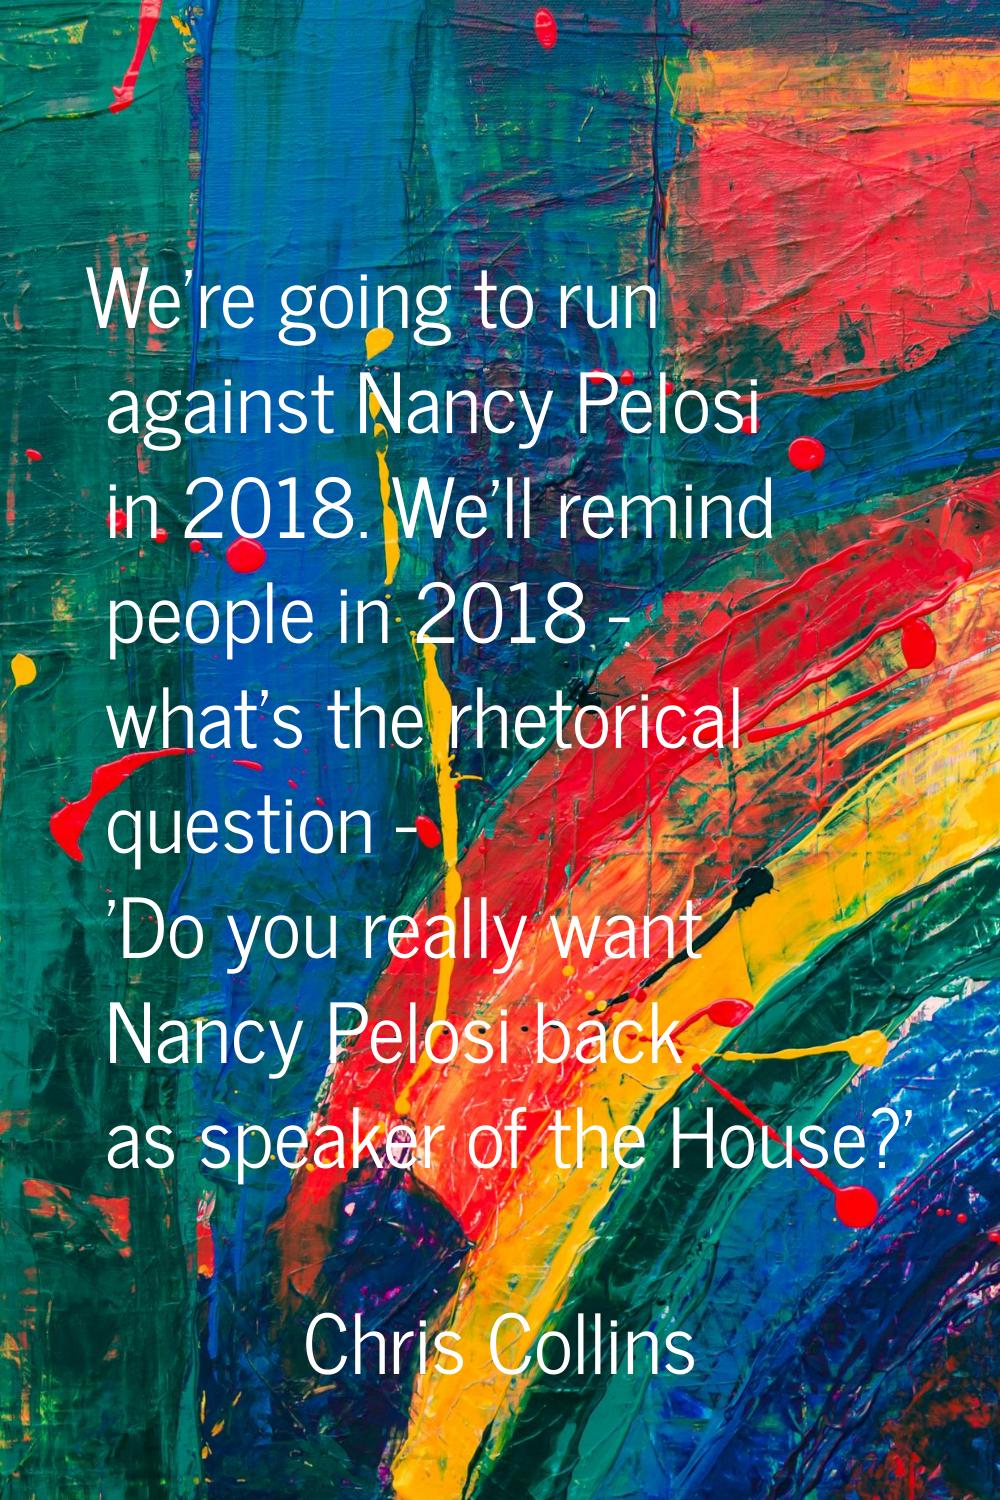 We're going to run against Nancy Pelosi in 2018. We'll remind people in 2018 - what's the rhetorica